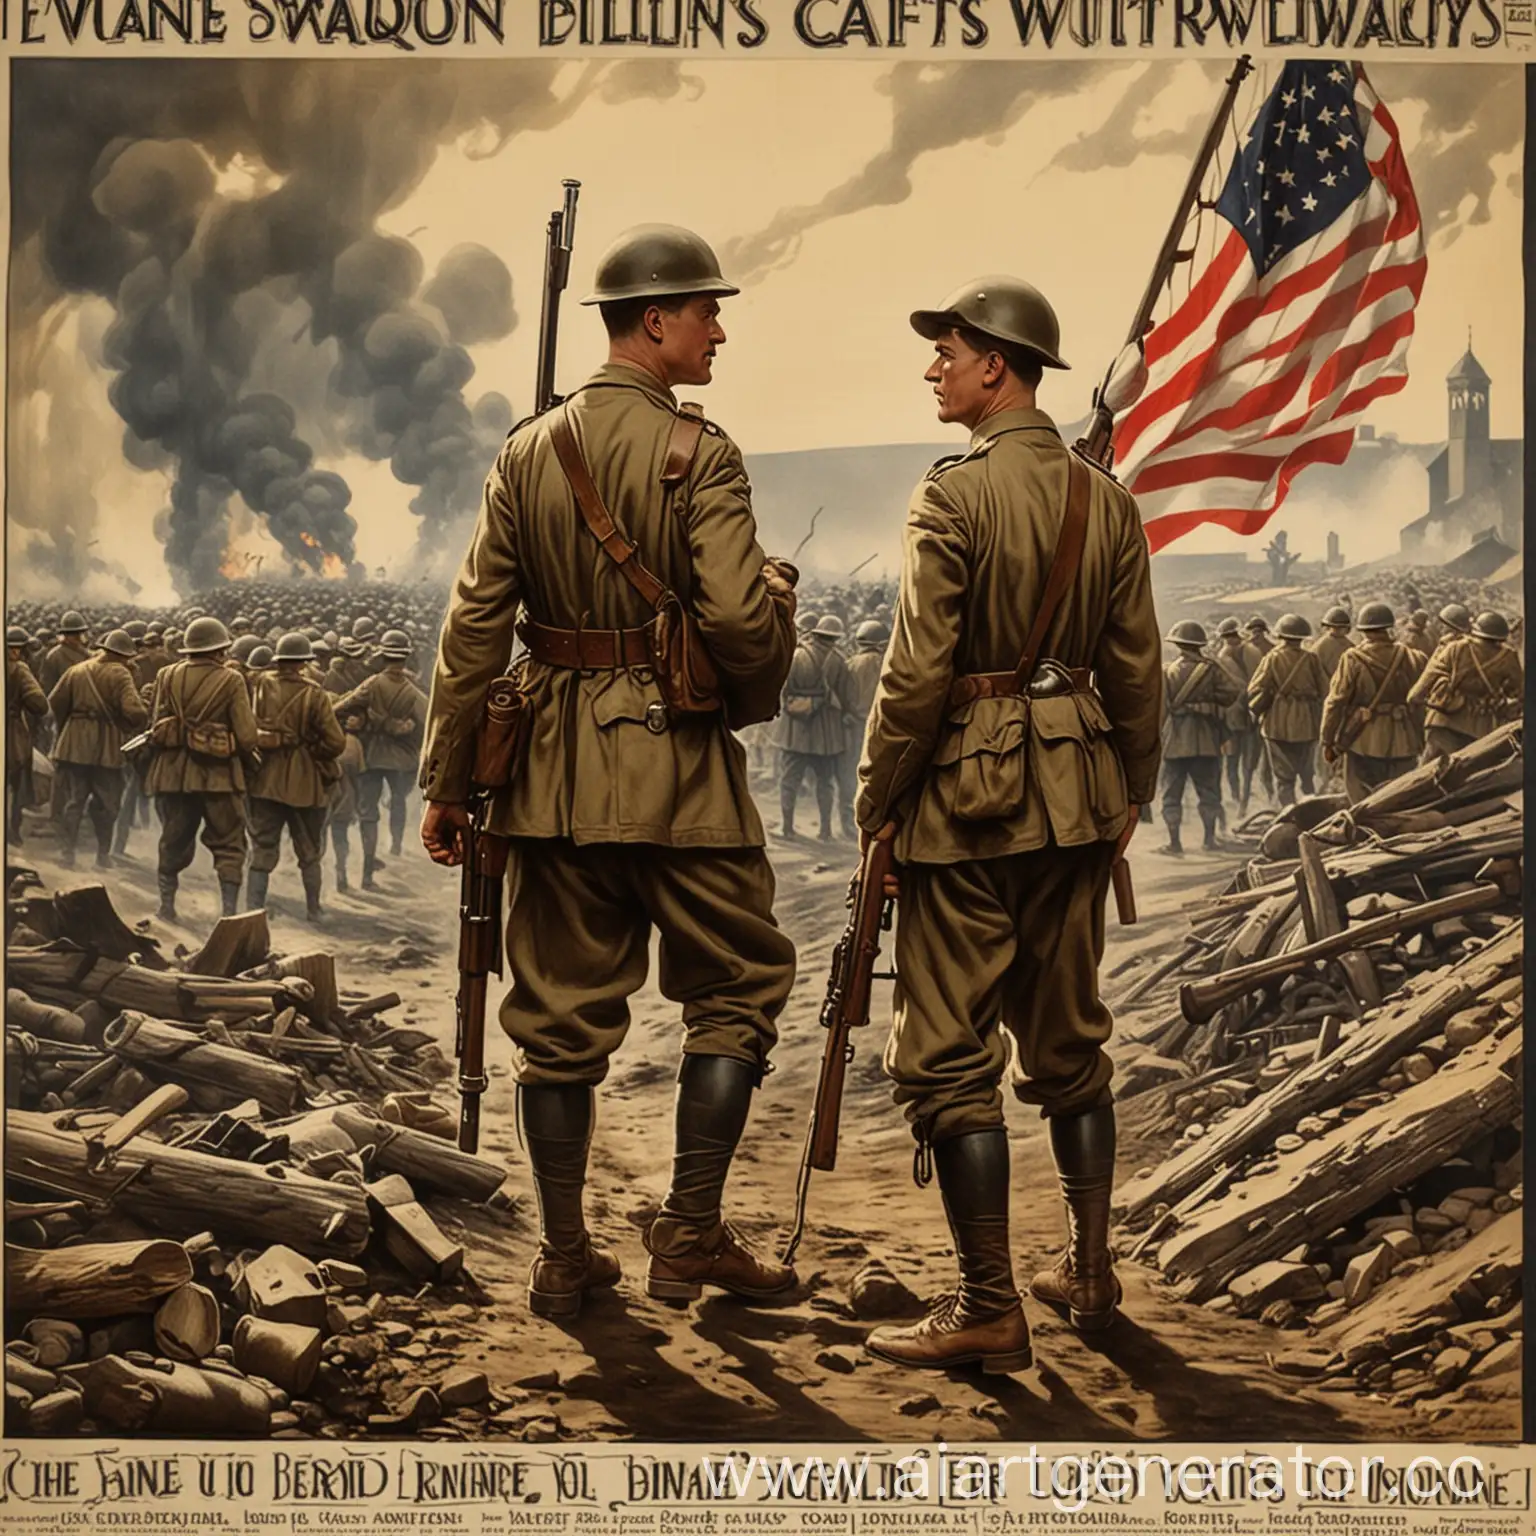 World-War-1-Poster-with-Patriotic-Soldiers-and-American-Flag